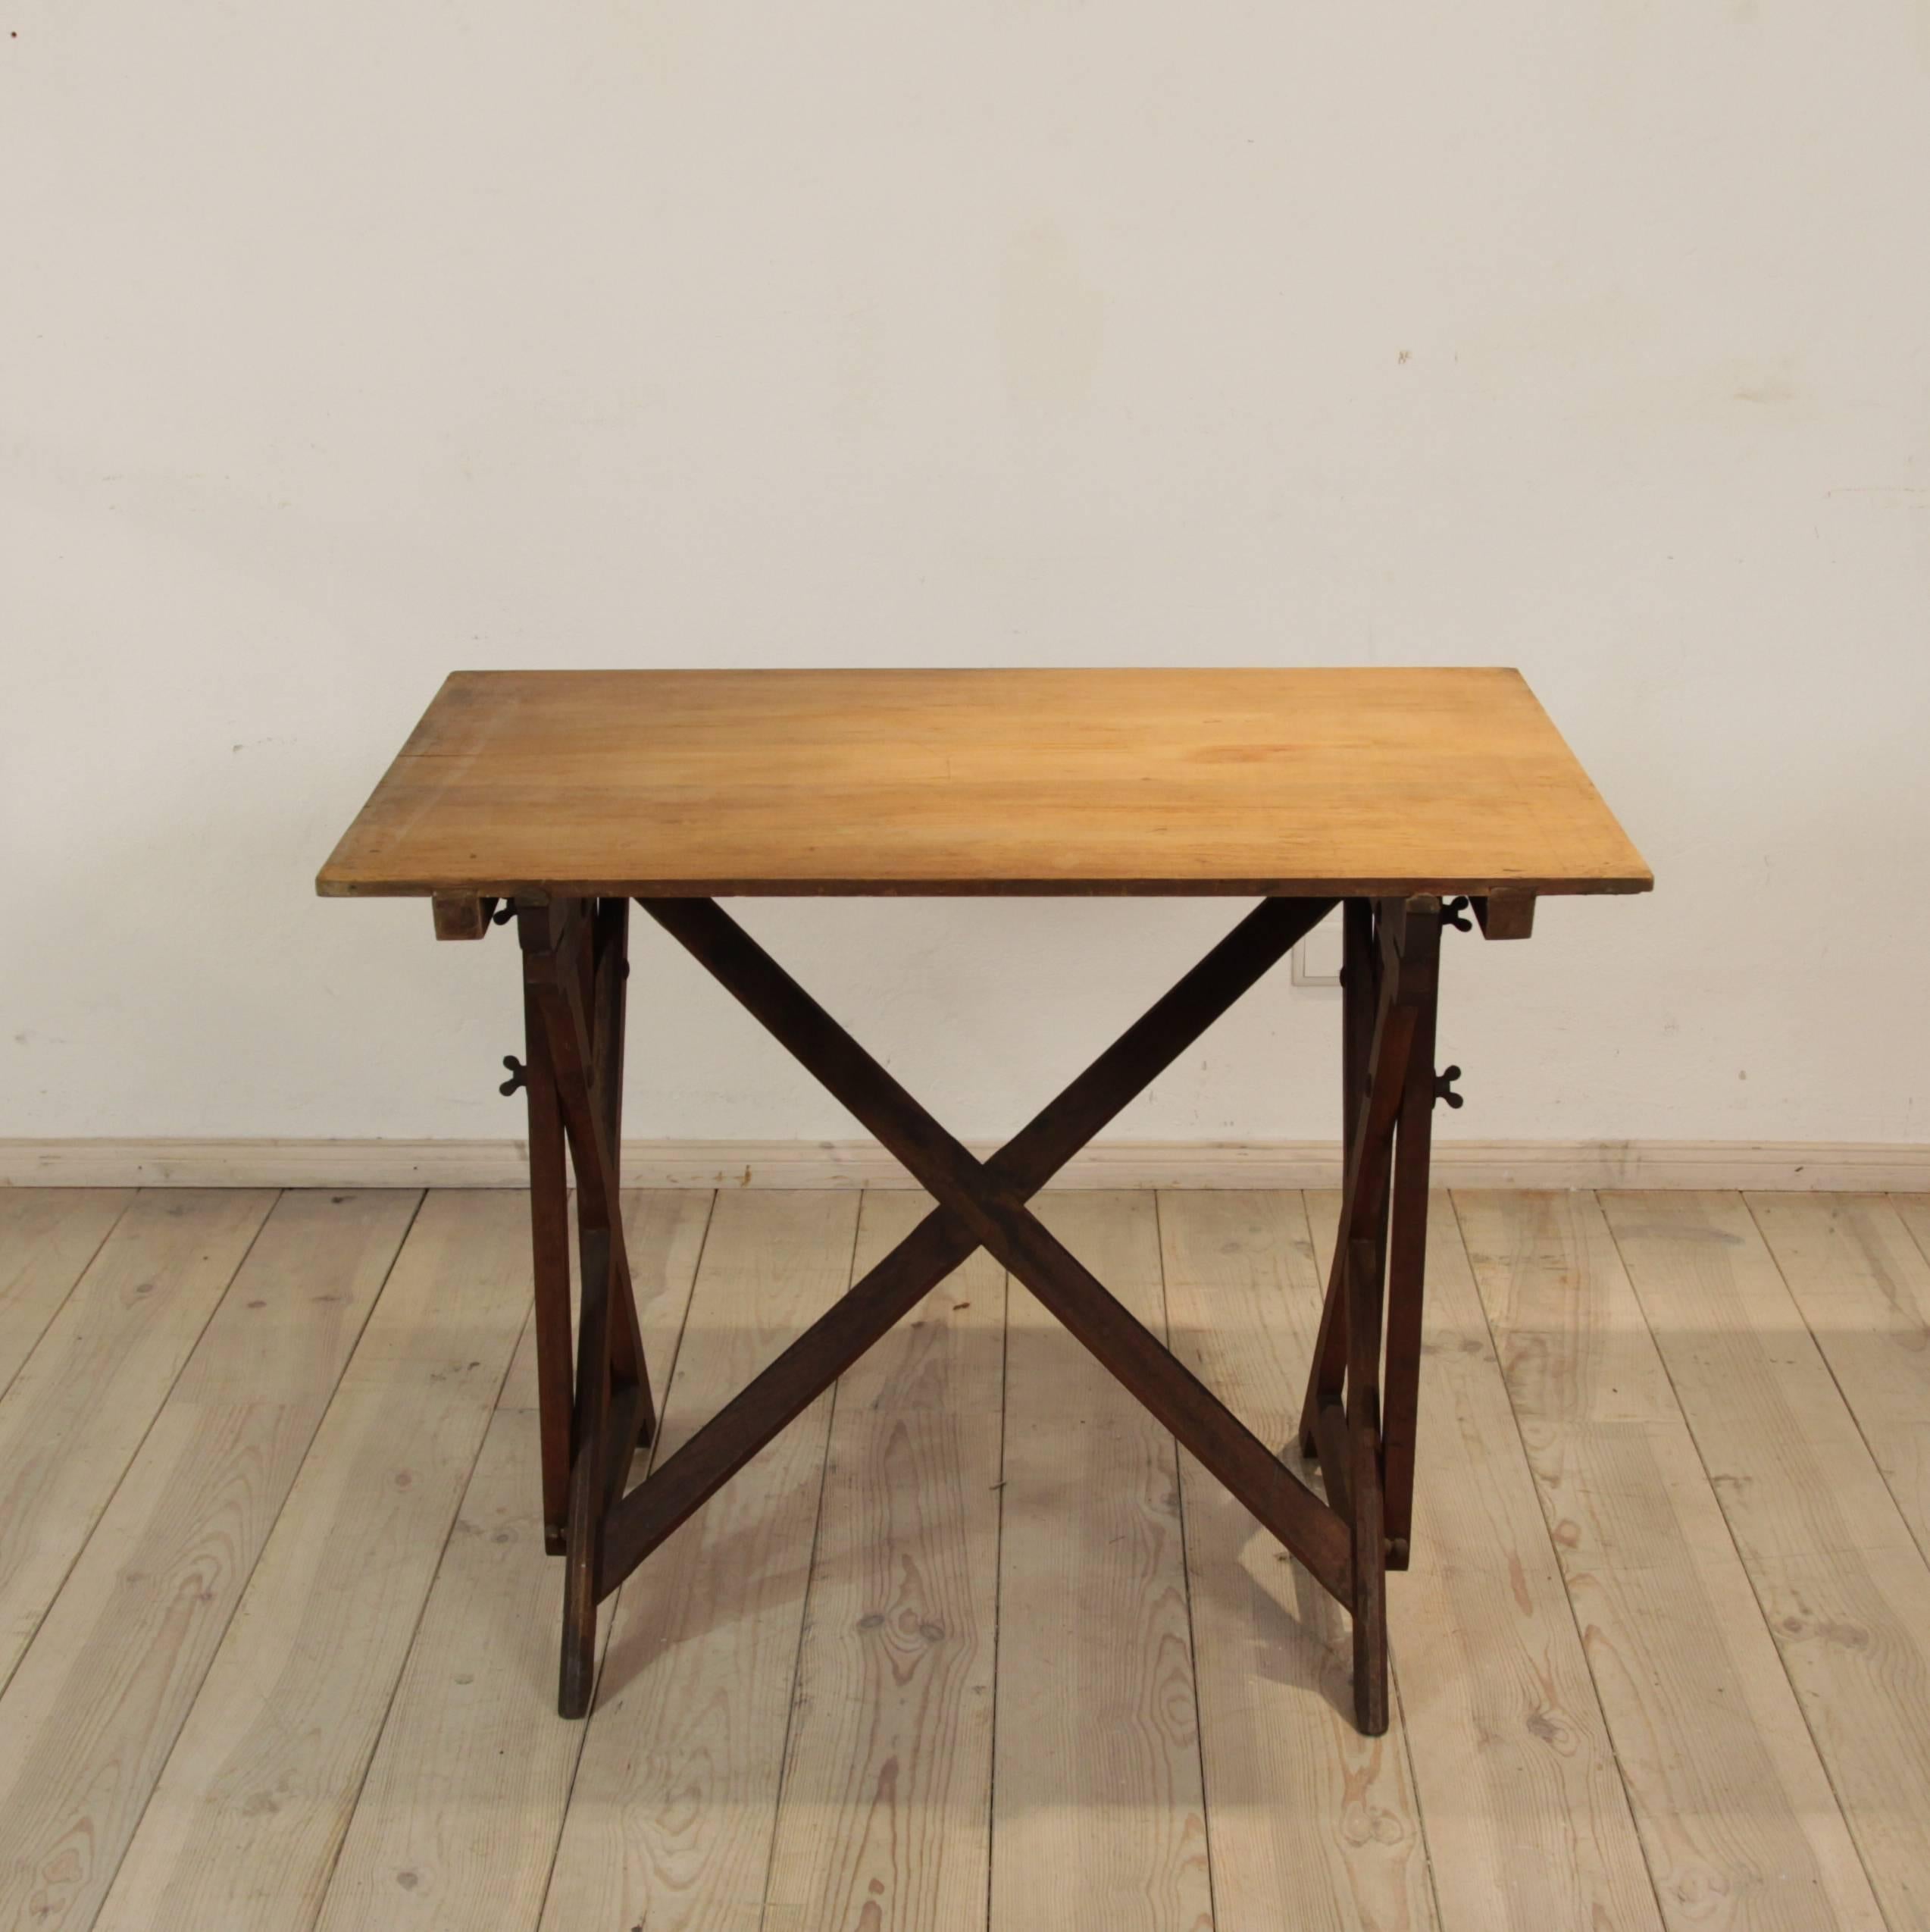 A German architects table, circa 1930 with an oak base and poplar-top by the company 